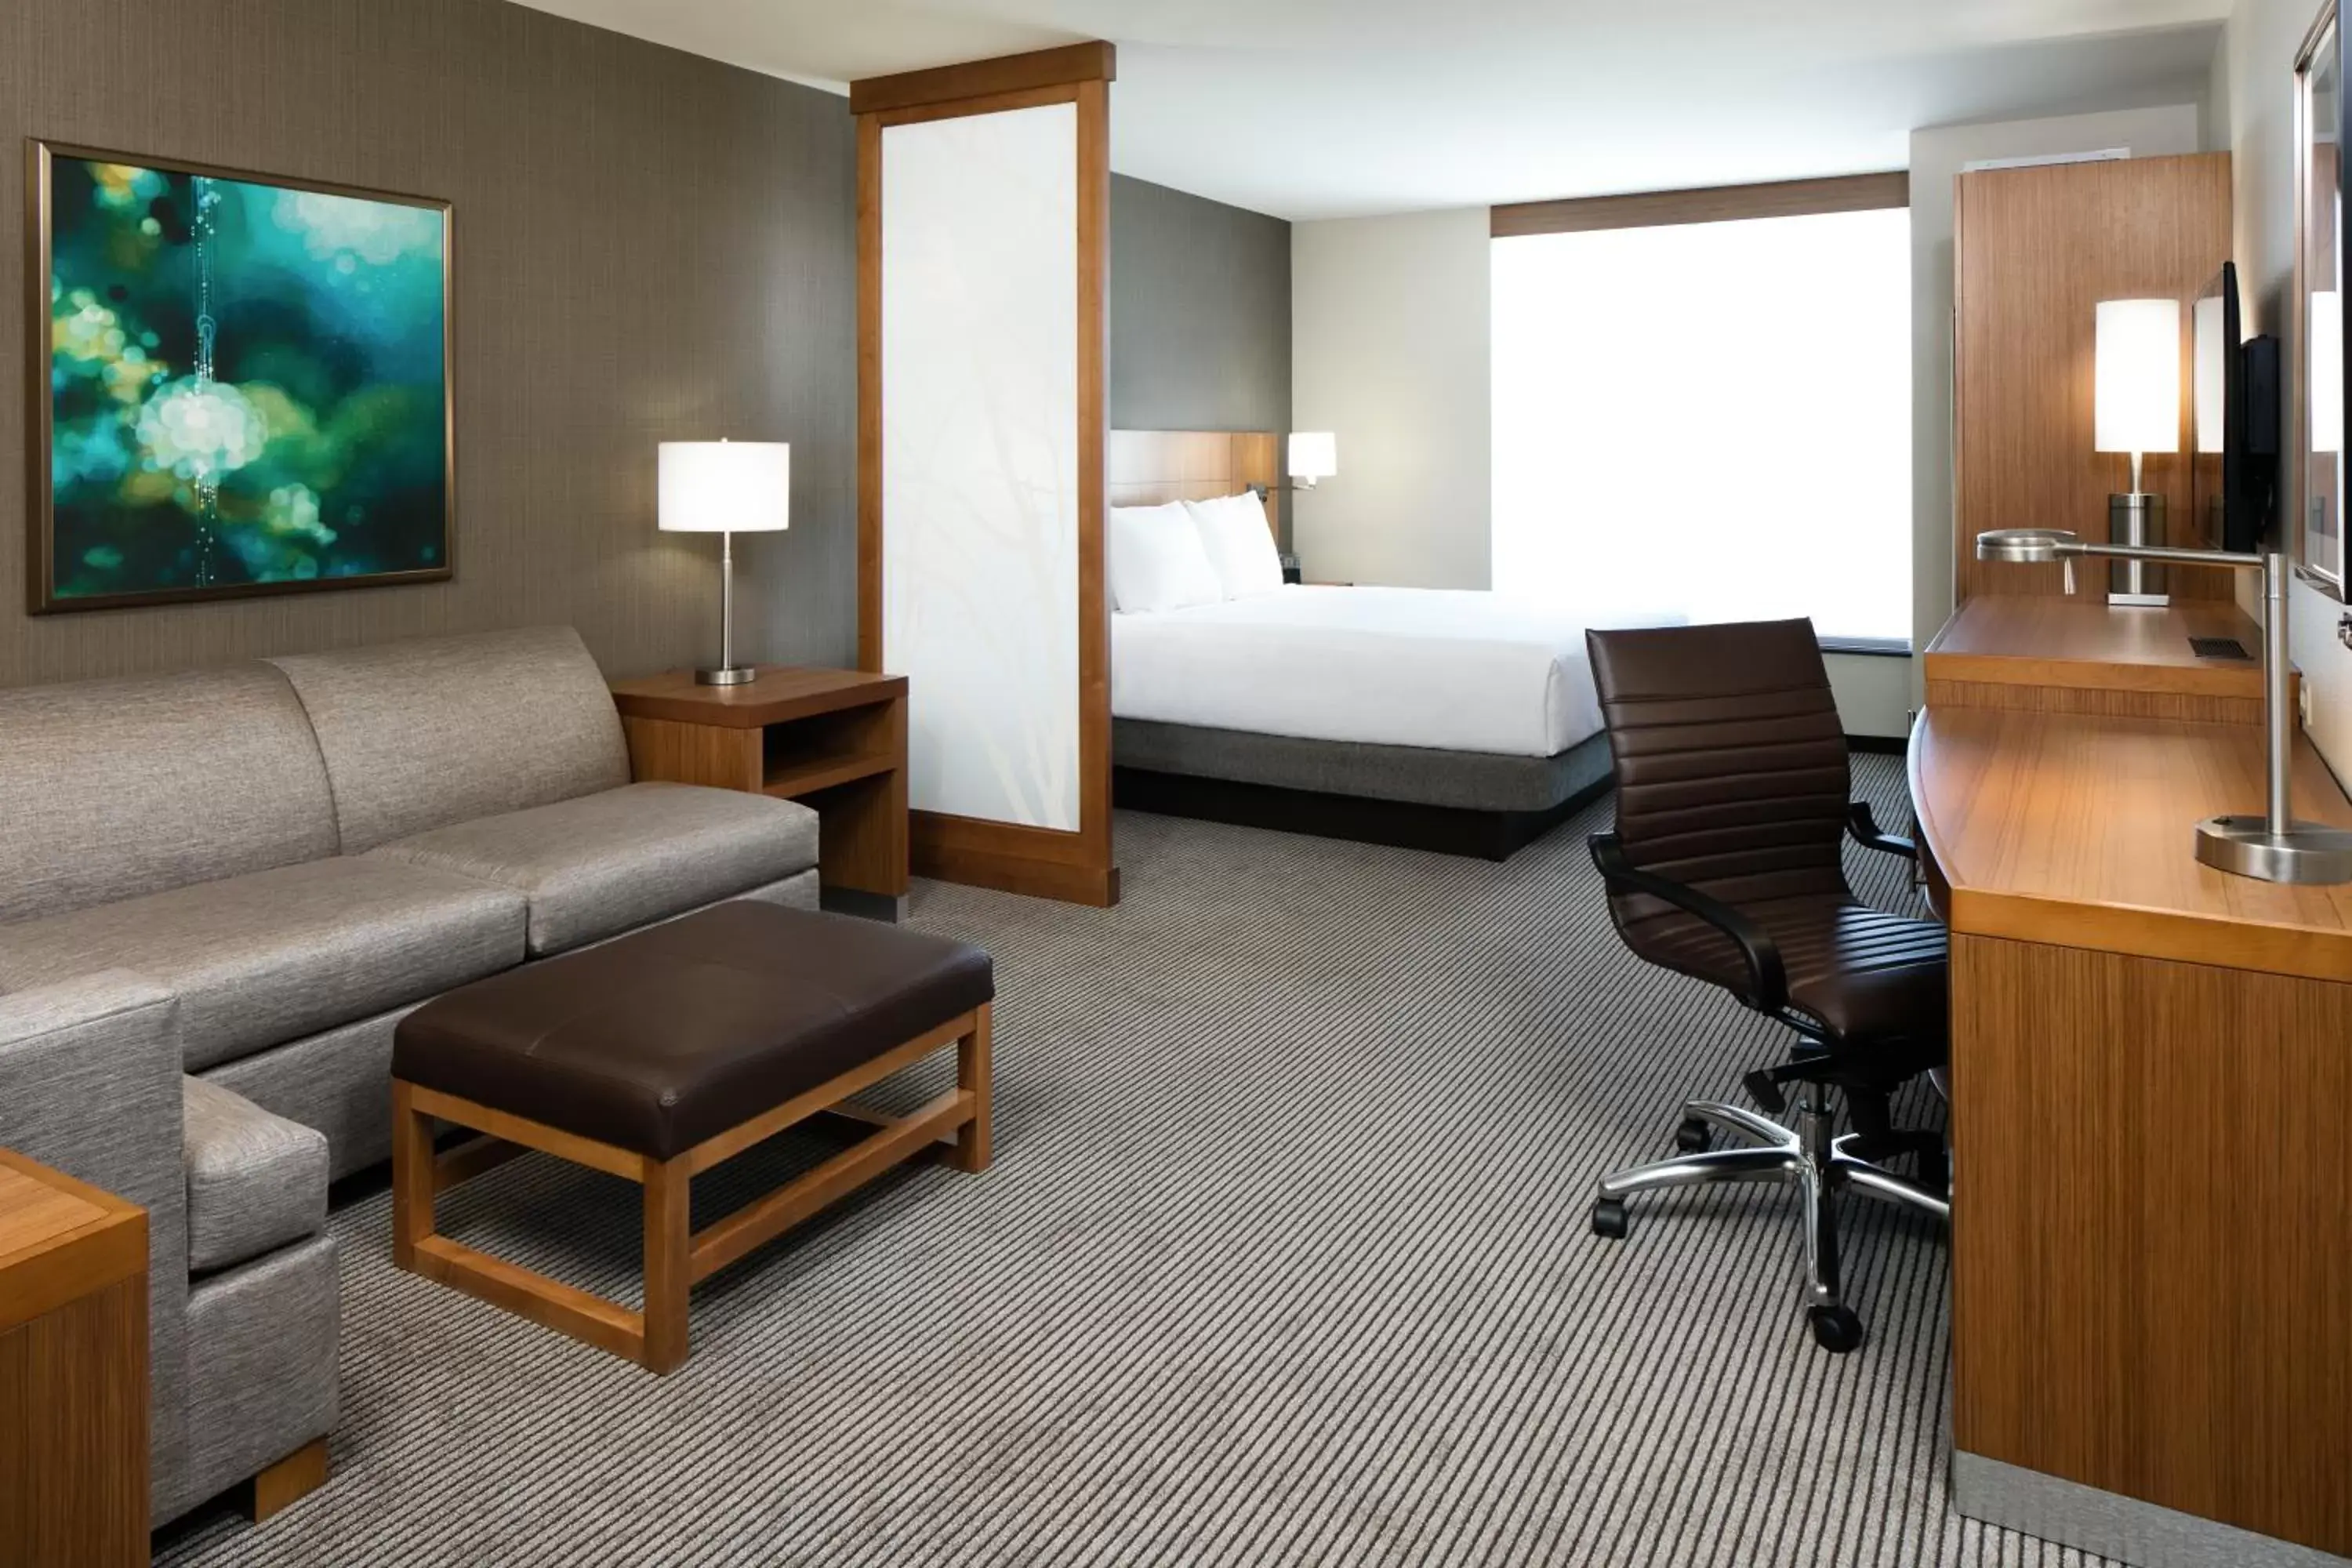 King Room with Sofa Bed and Accessible Tub - Disability Access in Hyatt Place Kansas City Lenexa City Center